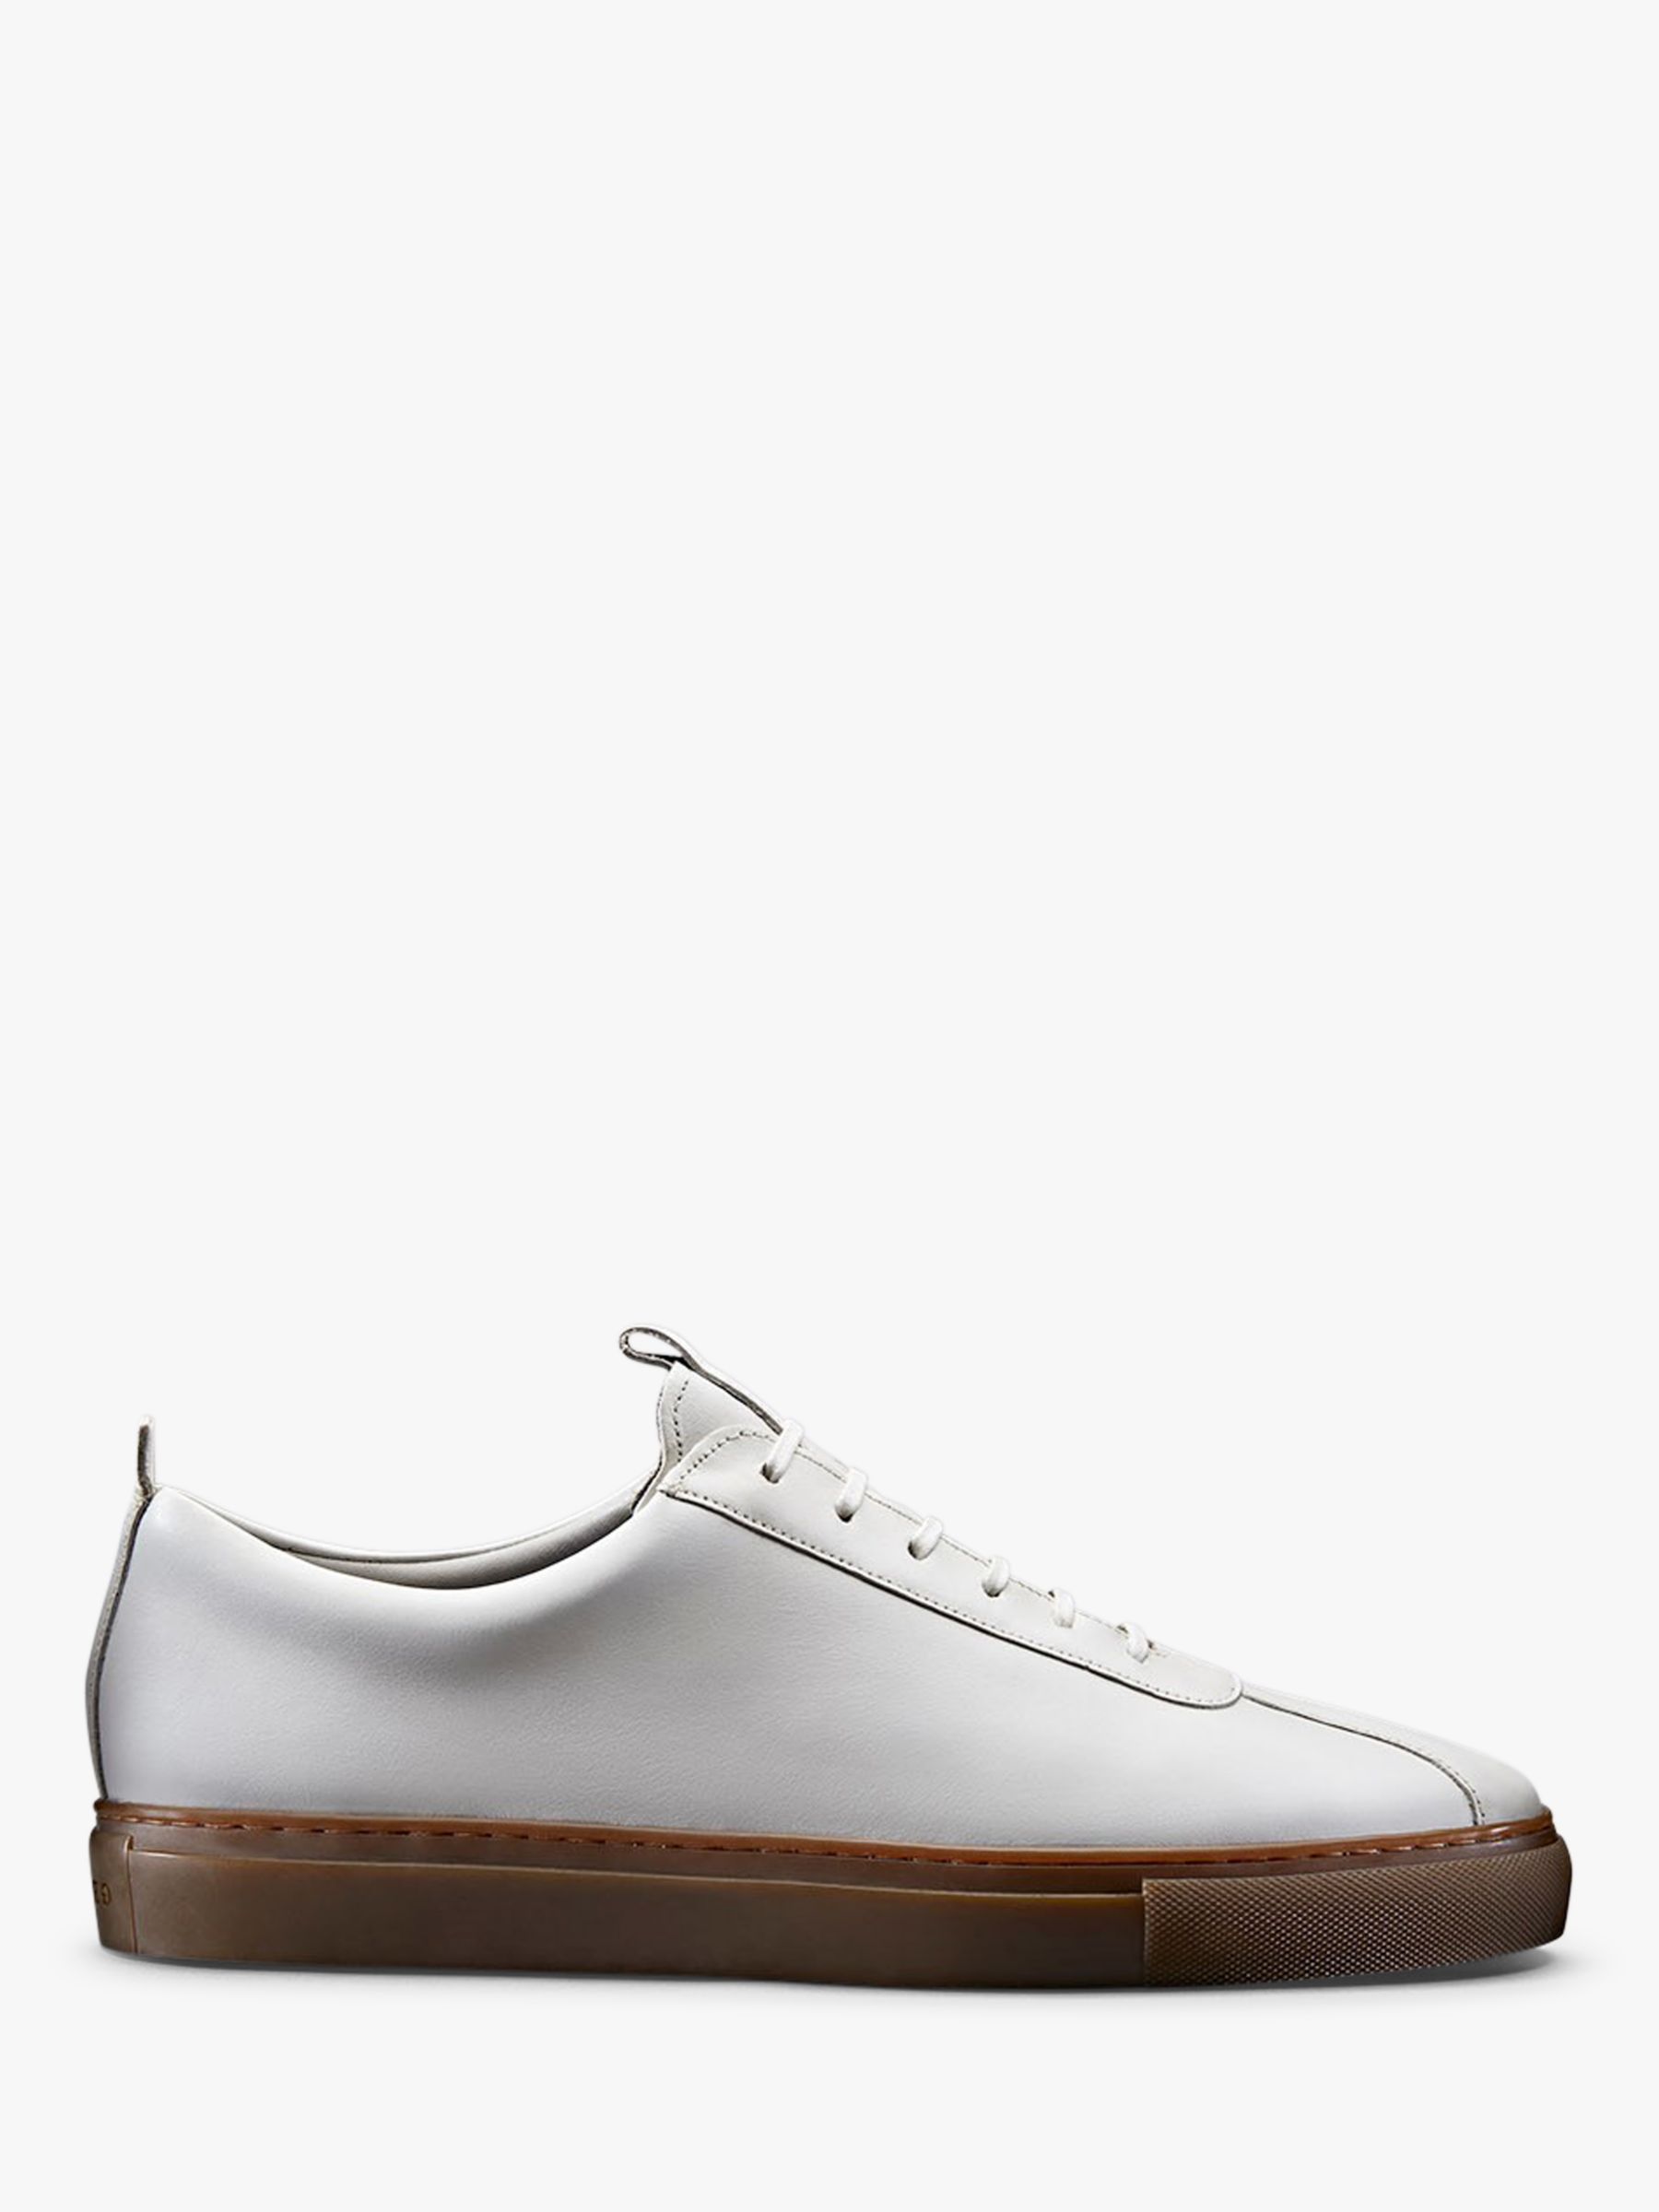 grenson leather sneakers